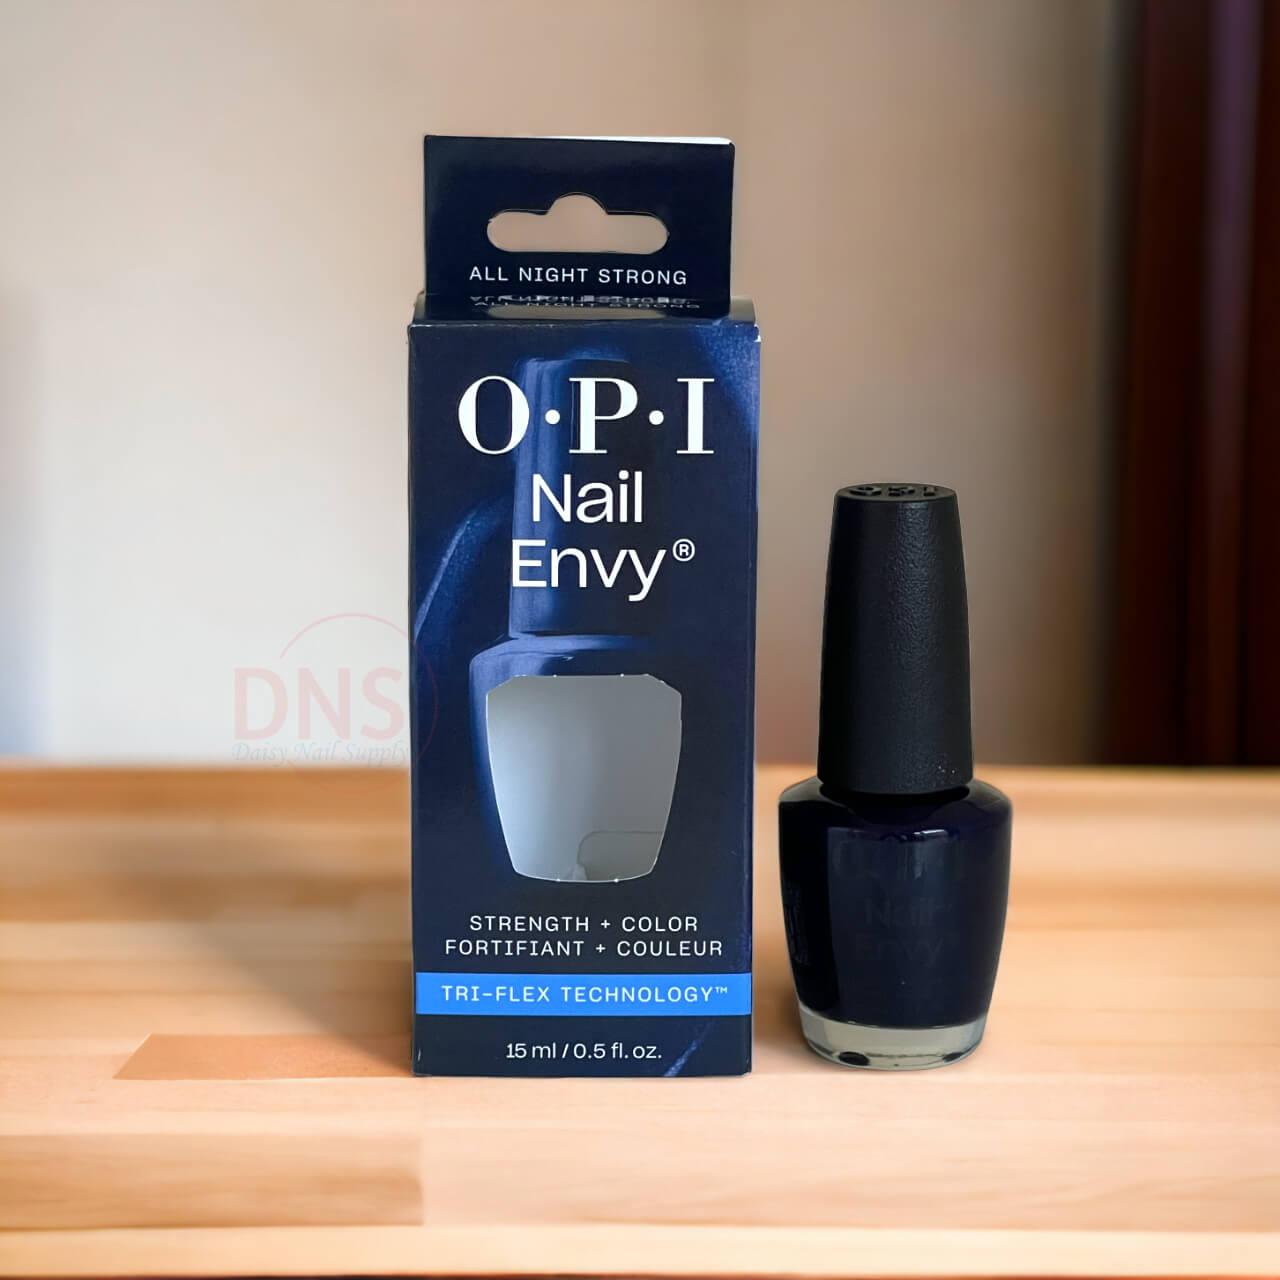 OPI Nail Envy Nail Strengthener 0.5 oz - All Night Strong NT227 (Pack of 6)